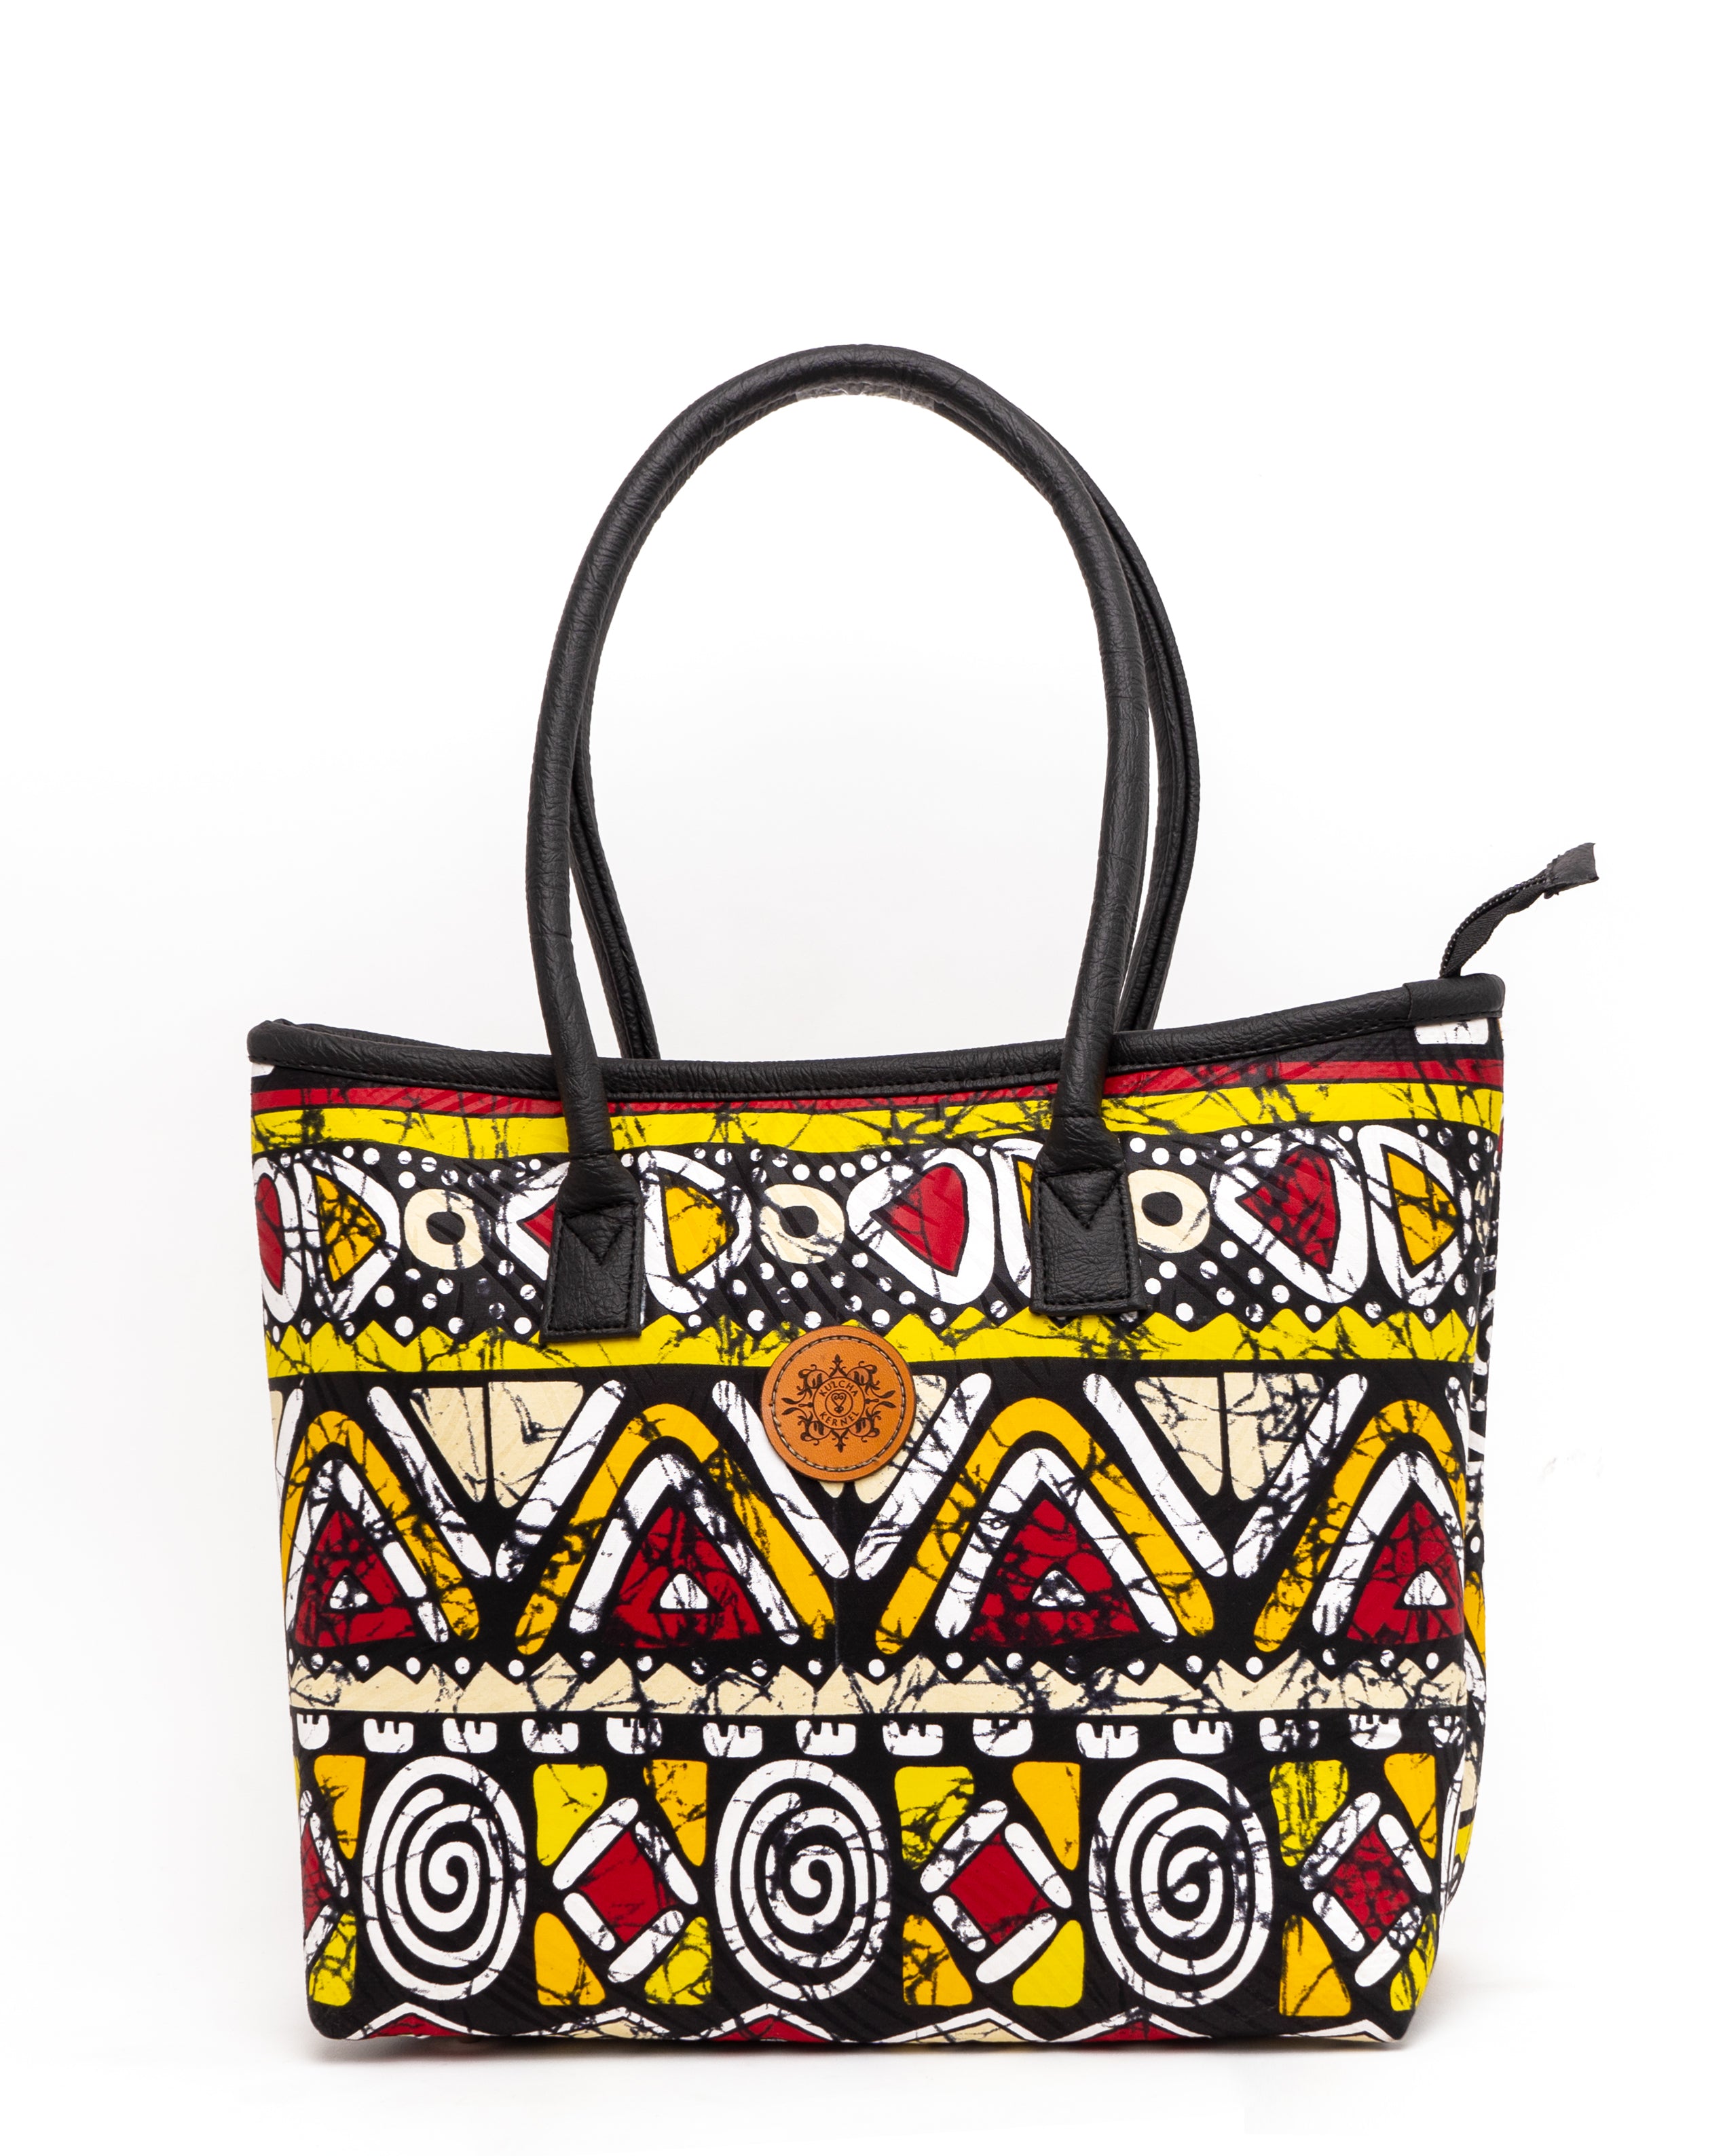 Ankara/ African print mid sized handbag with Laptop carry pouch.